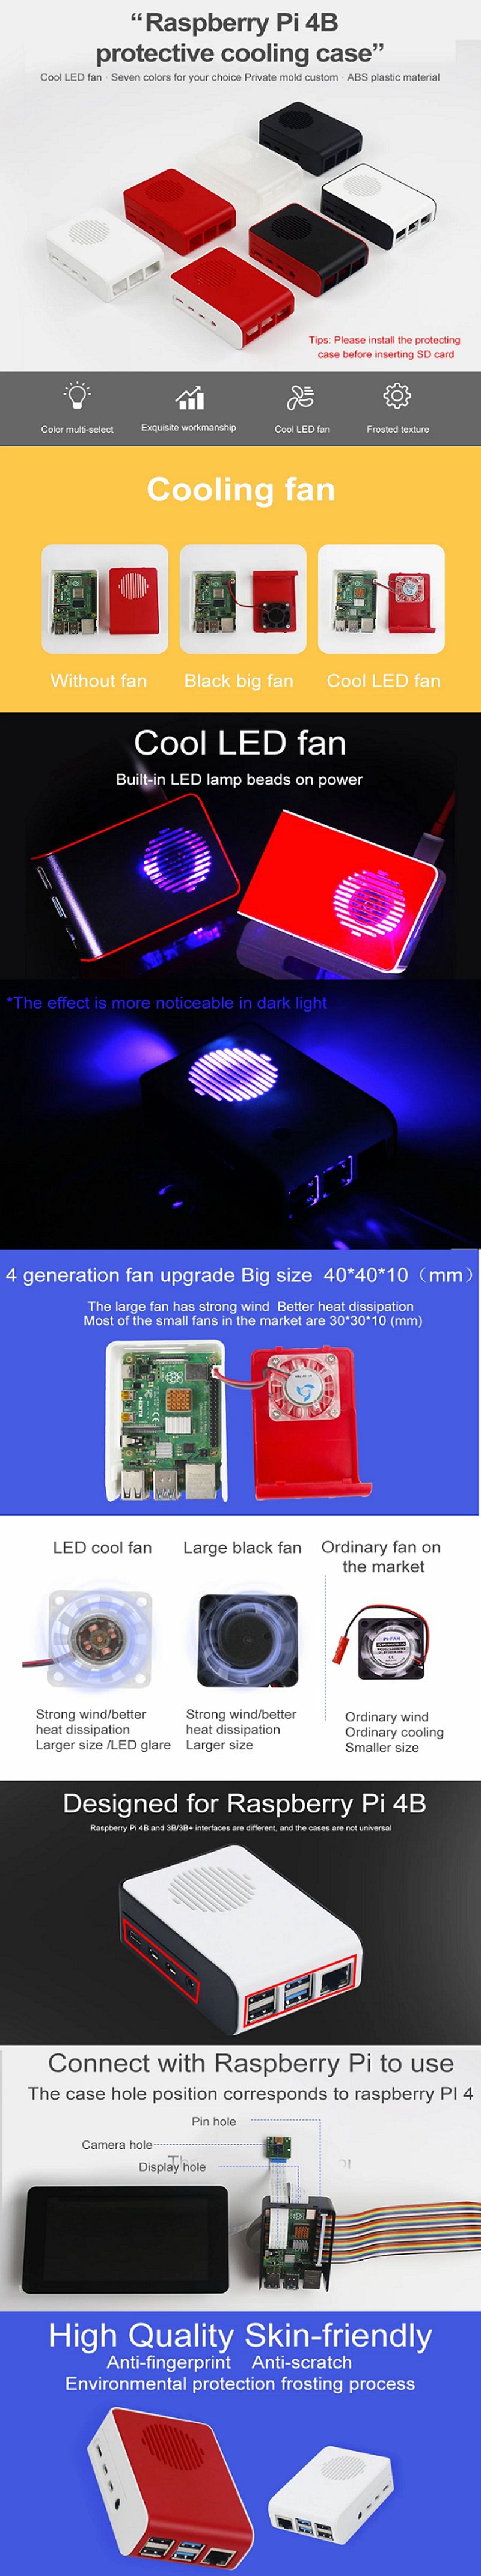 Yahboom-ABS-Protective-Case-with-Cooling-Fan-Version-for-Raspberry-Pi-4B-1617052